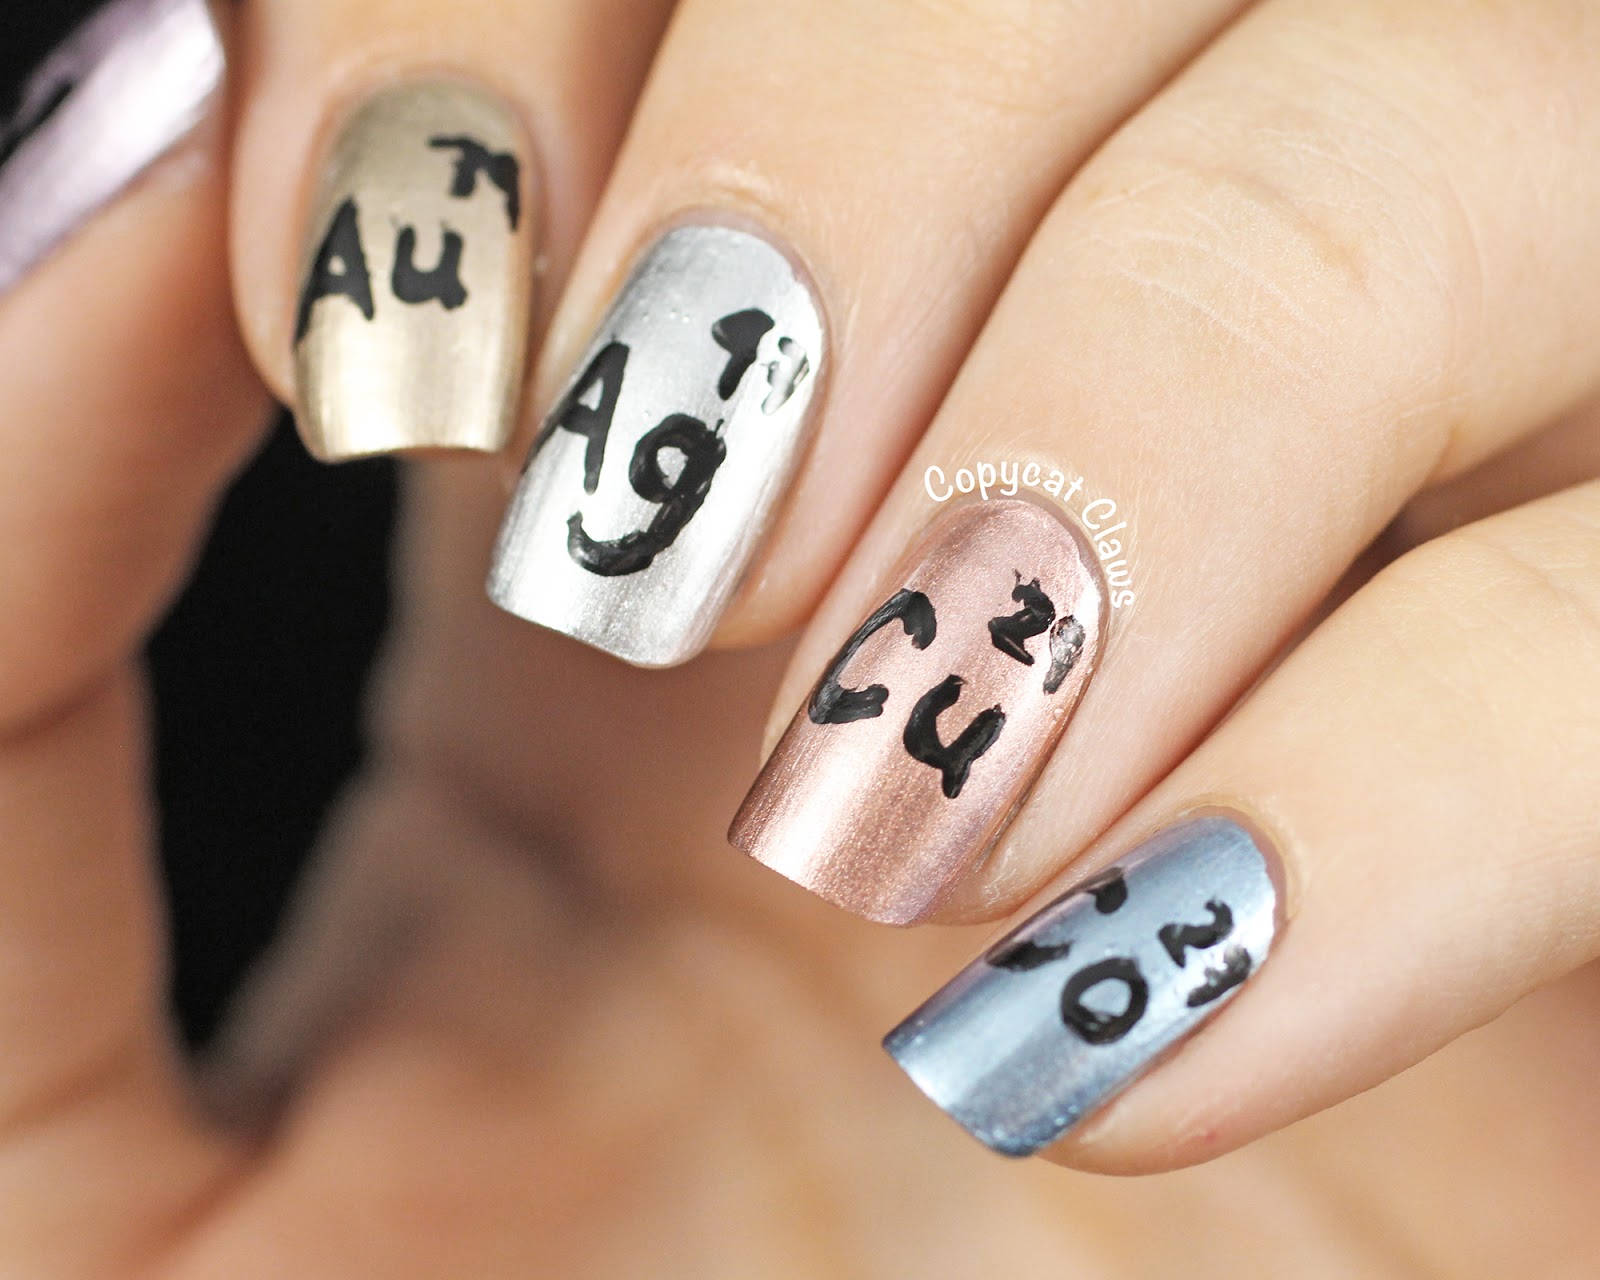 1. Metallic Nail Art Ideas for a Shiny and Chic Look - wide 7